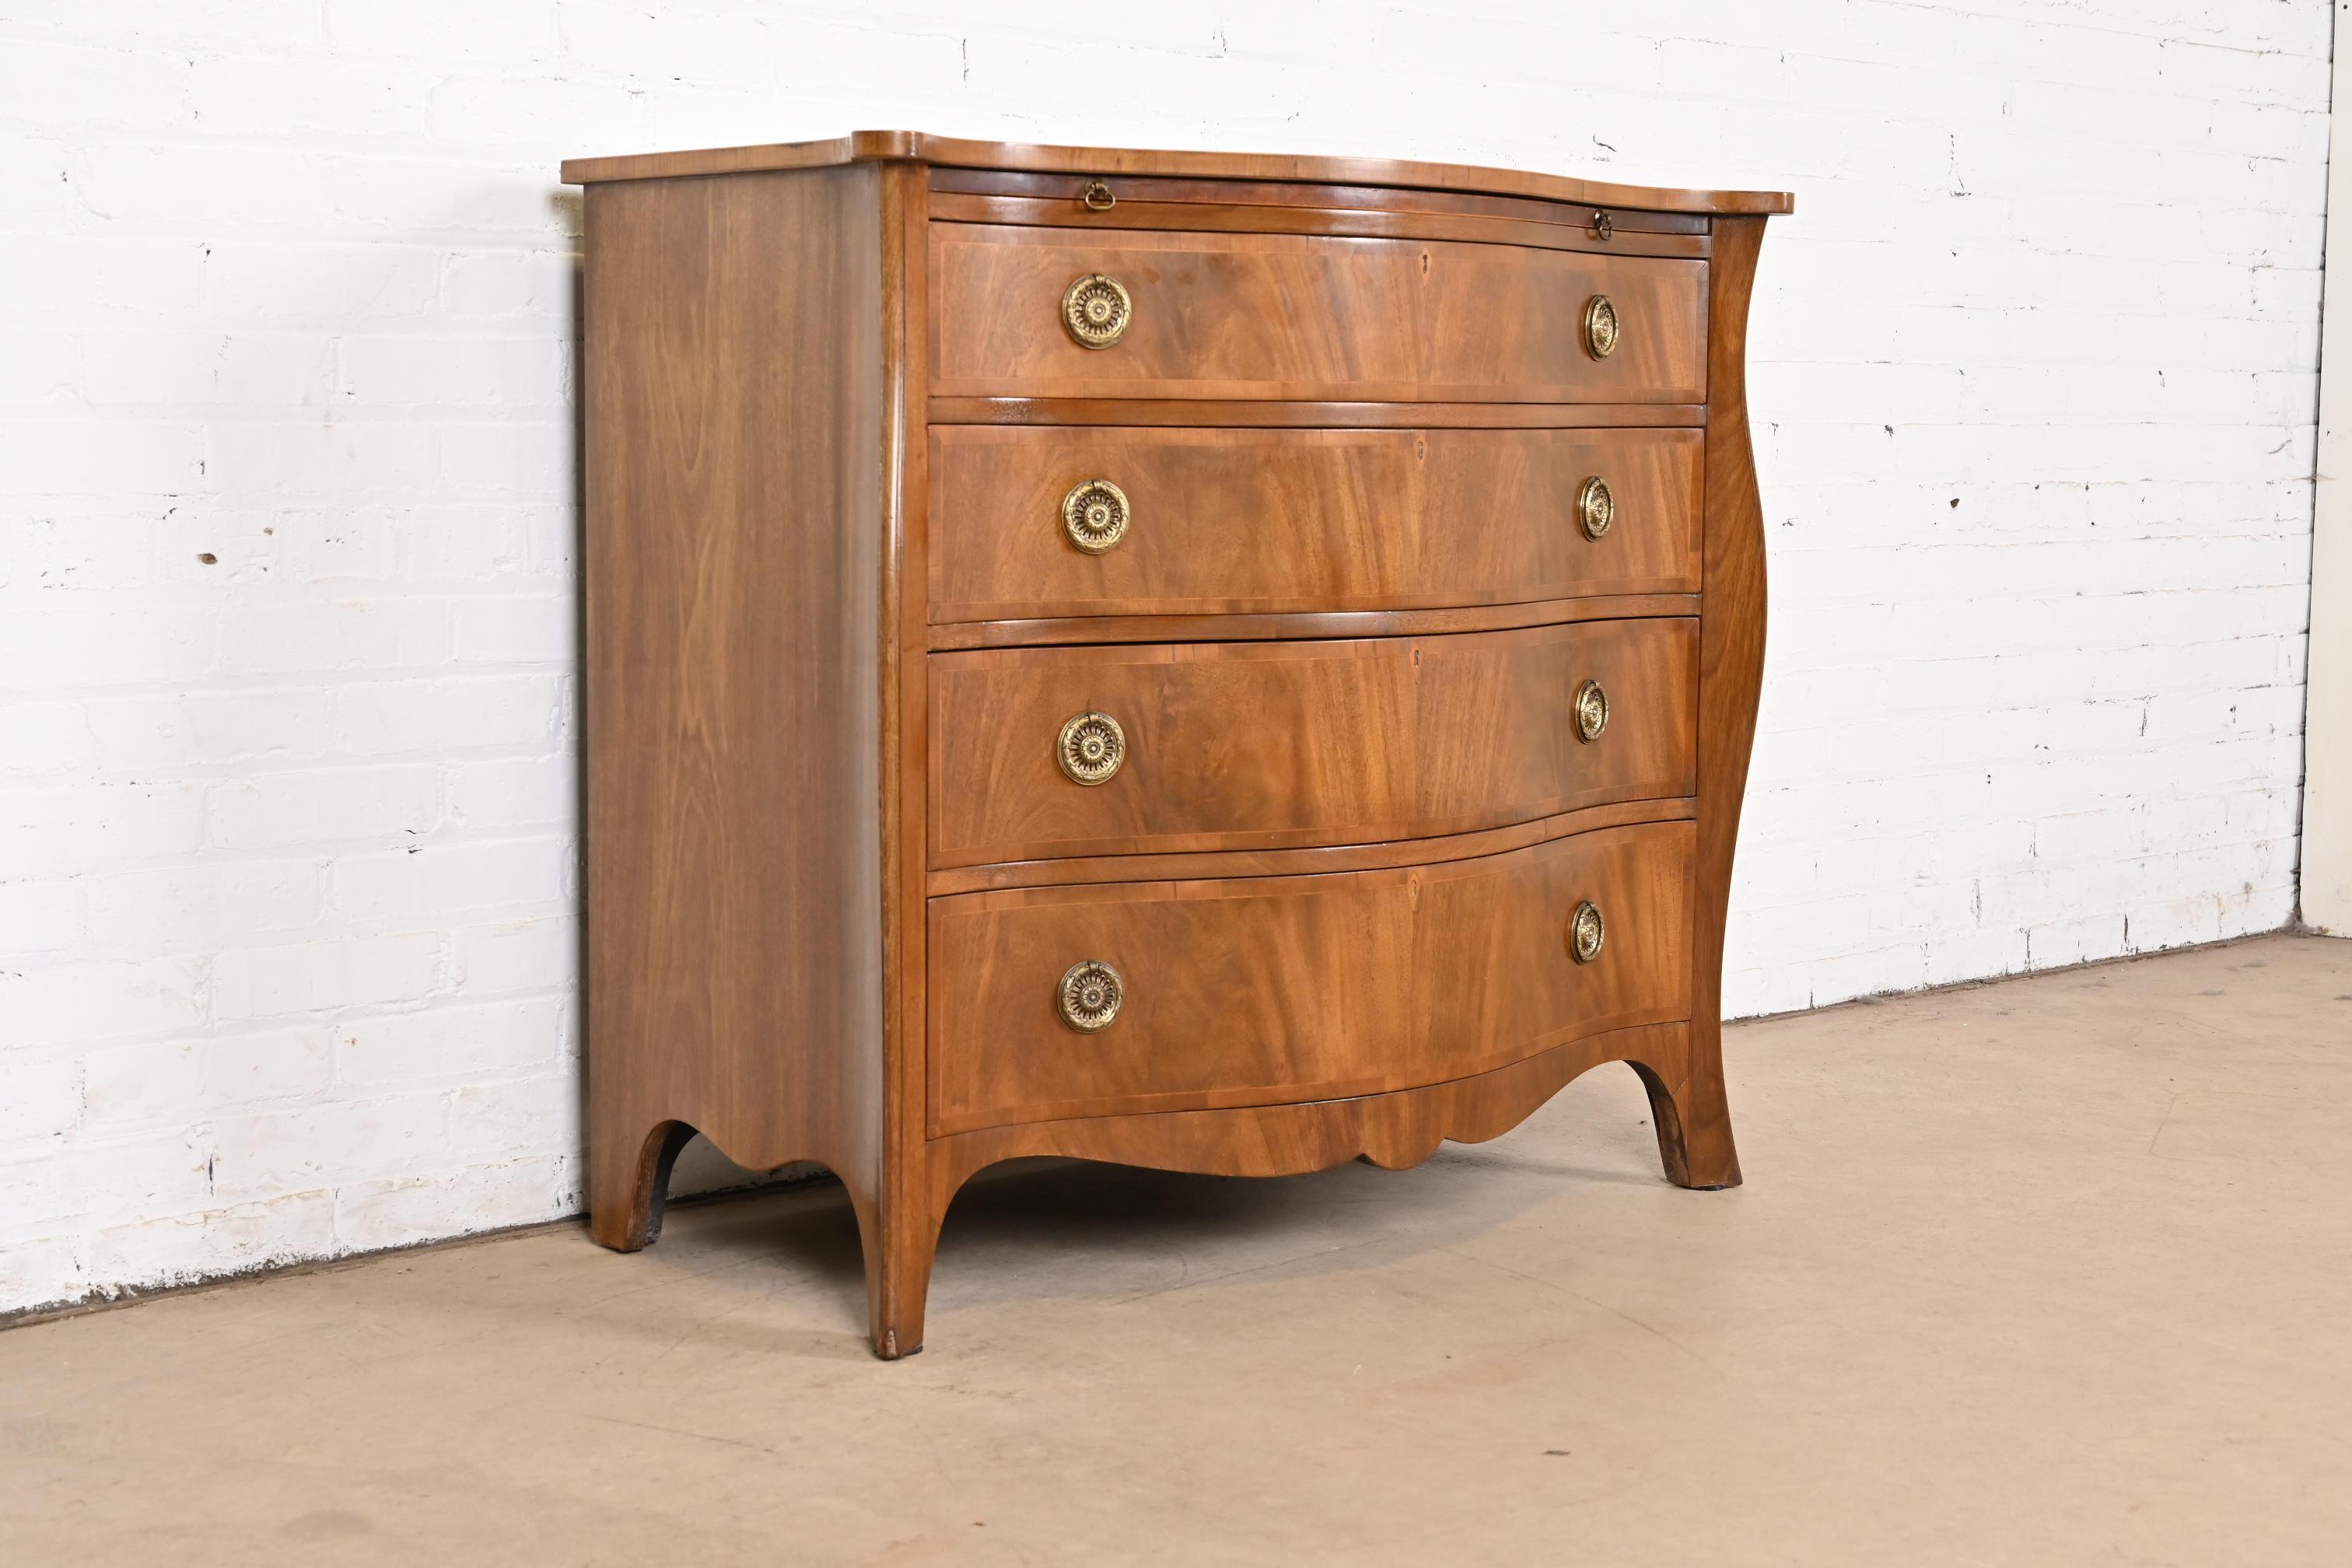 Mid-20th Century Baker Furniture Georgian Flame Mahogany Serpentine Front Chest of Drawers, 1940s For Sale